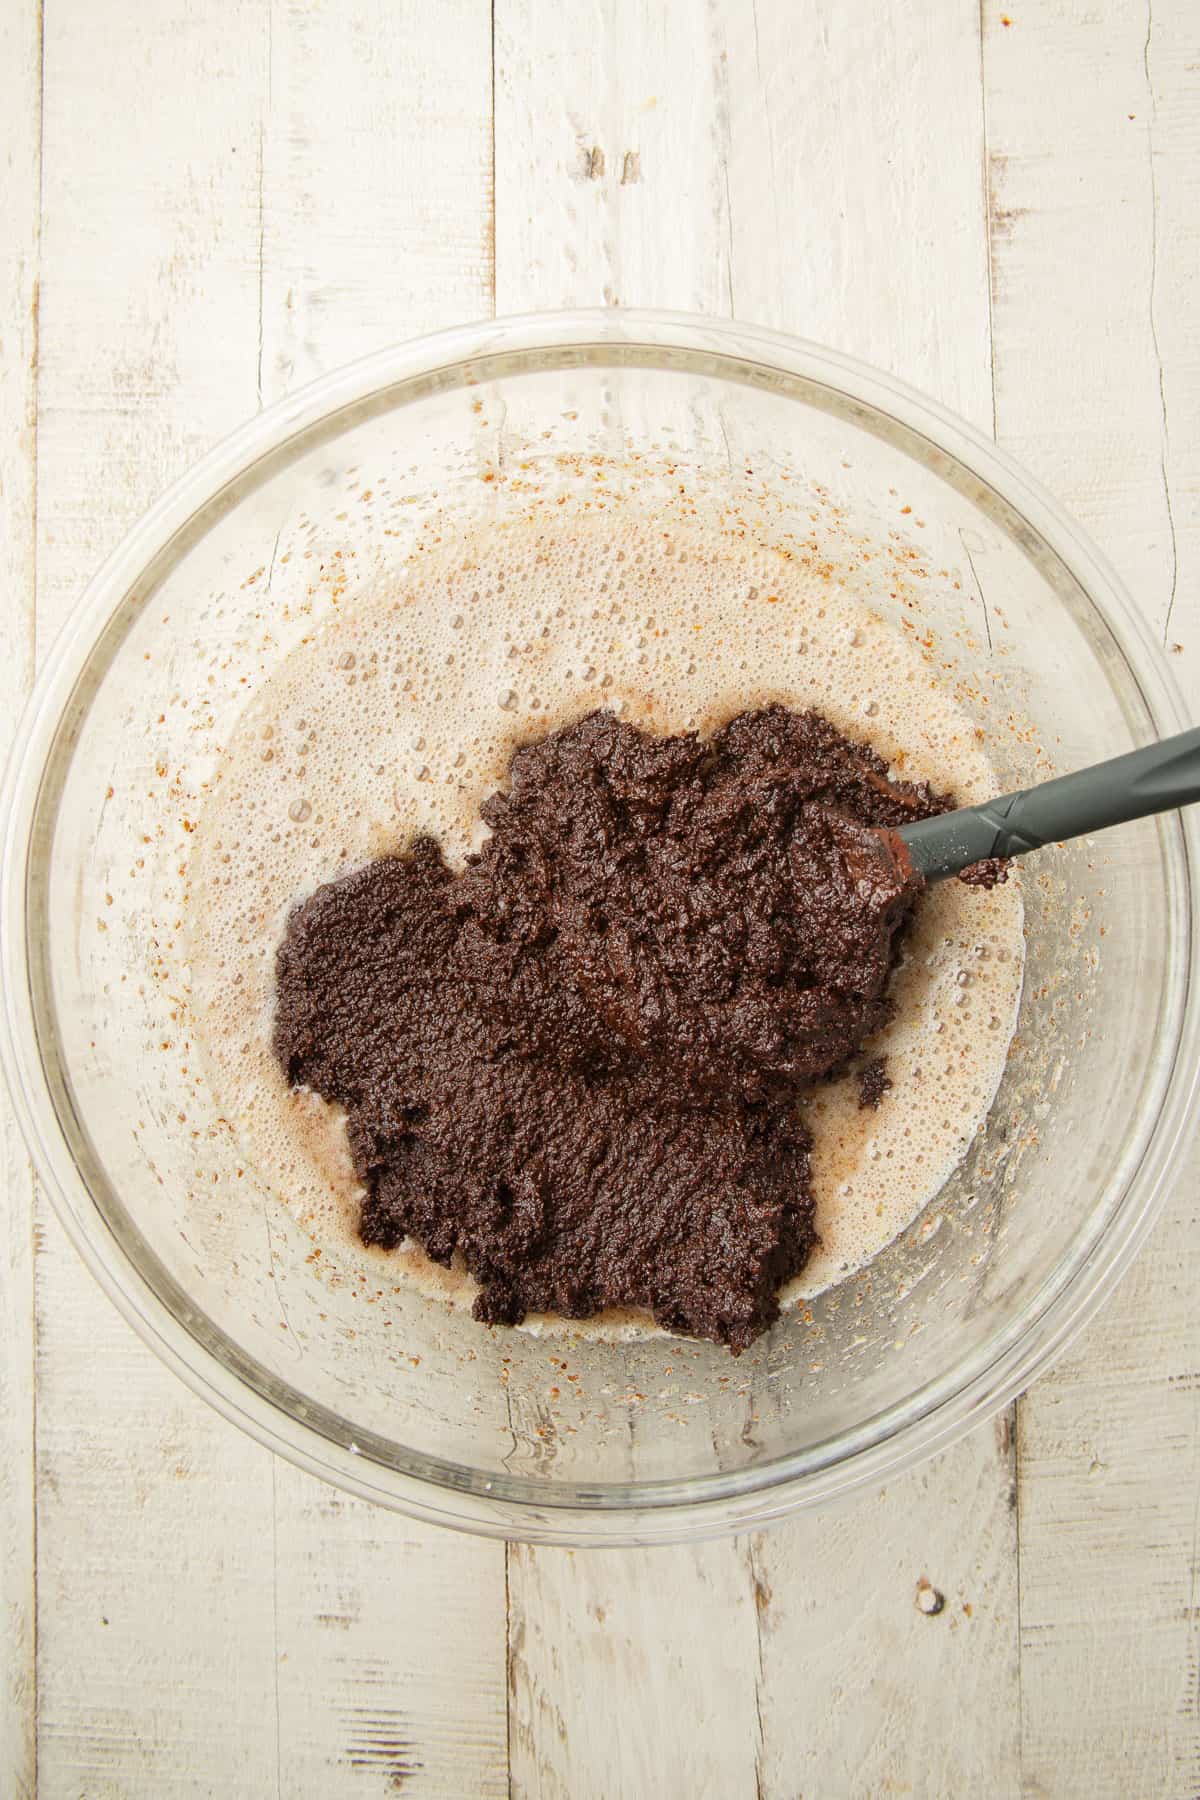 Whipped flax eggs in a mixing bowl with mixture of almond flour and cholate on top.